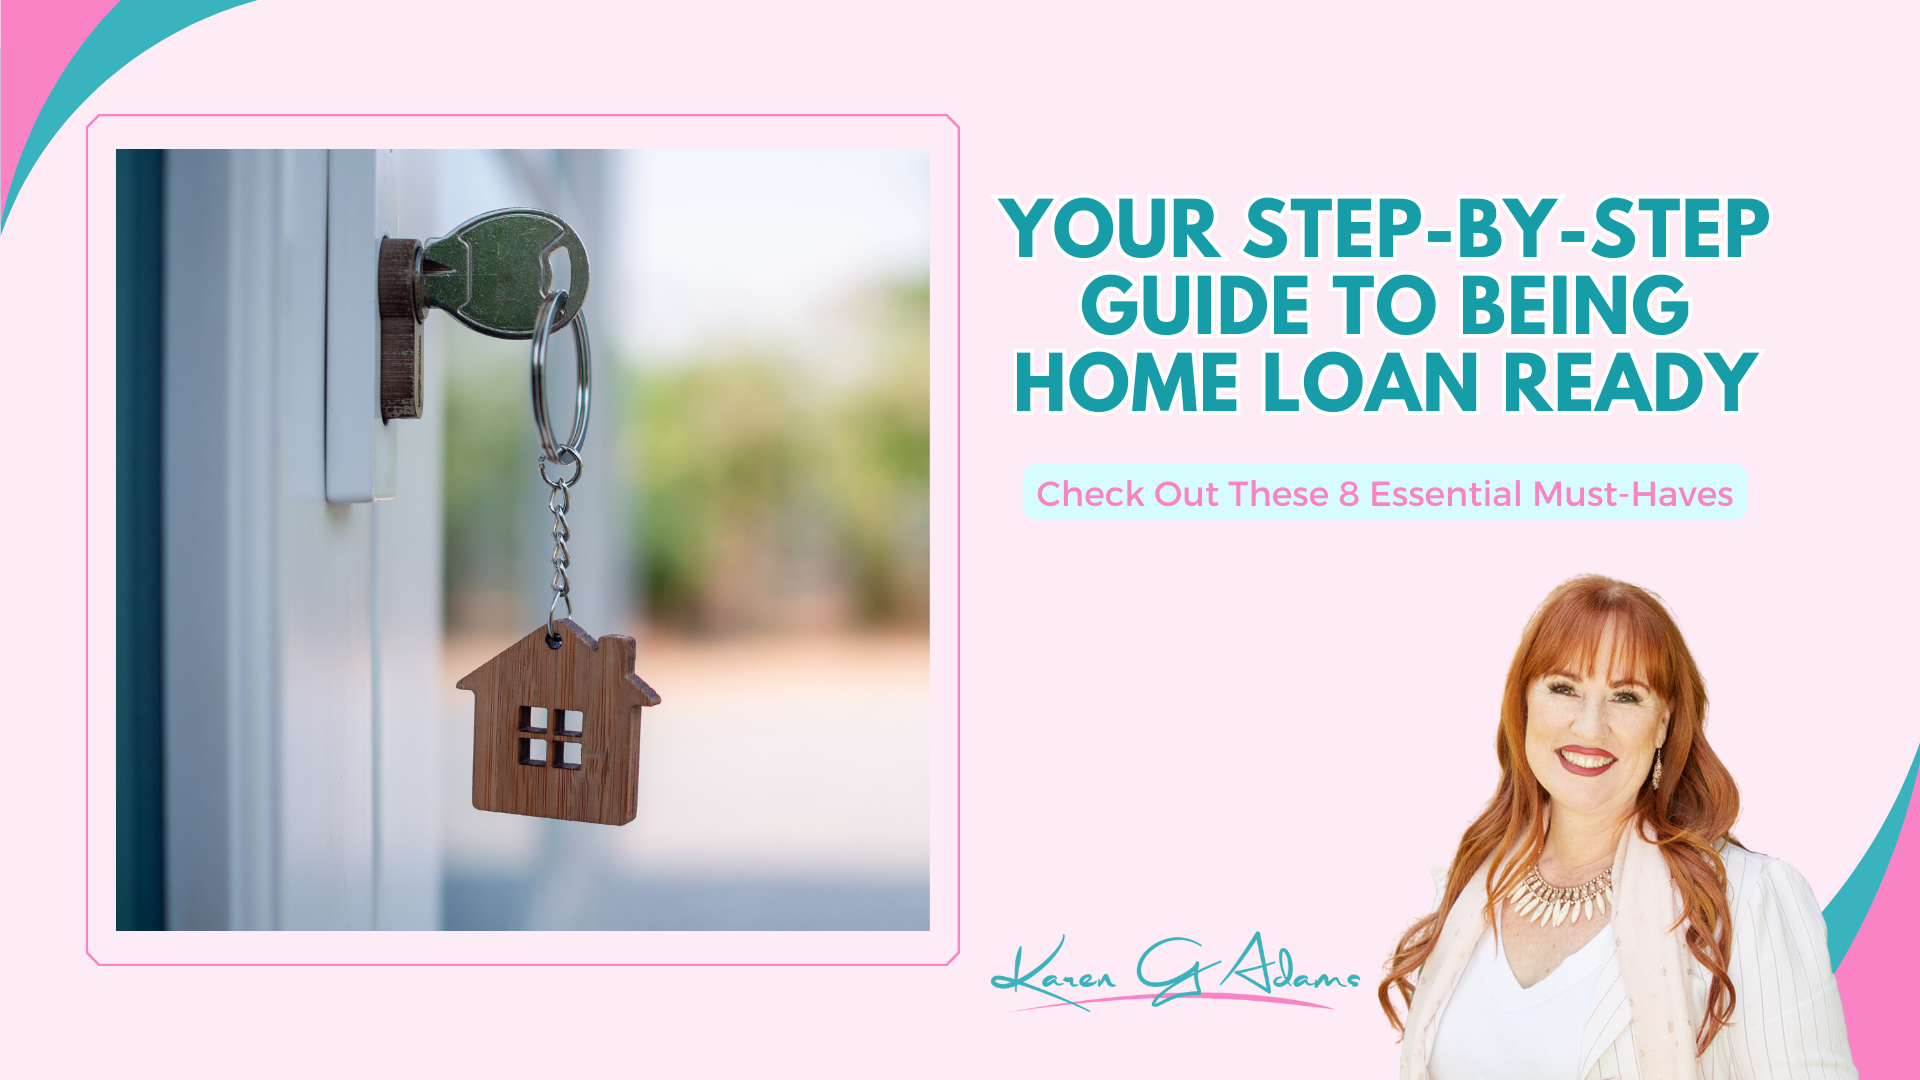 Your Step-by-Step Guide to Being Home Loan Ready - Karen G Adams of Financial Management 101